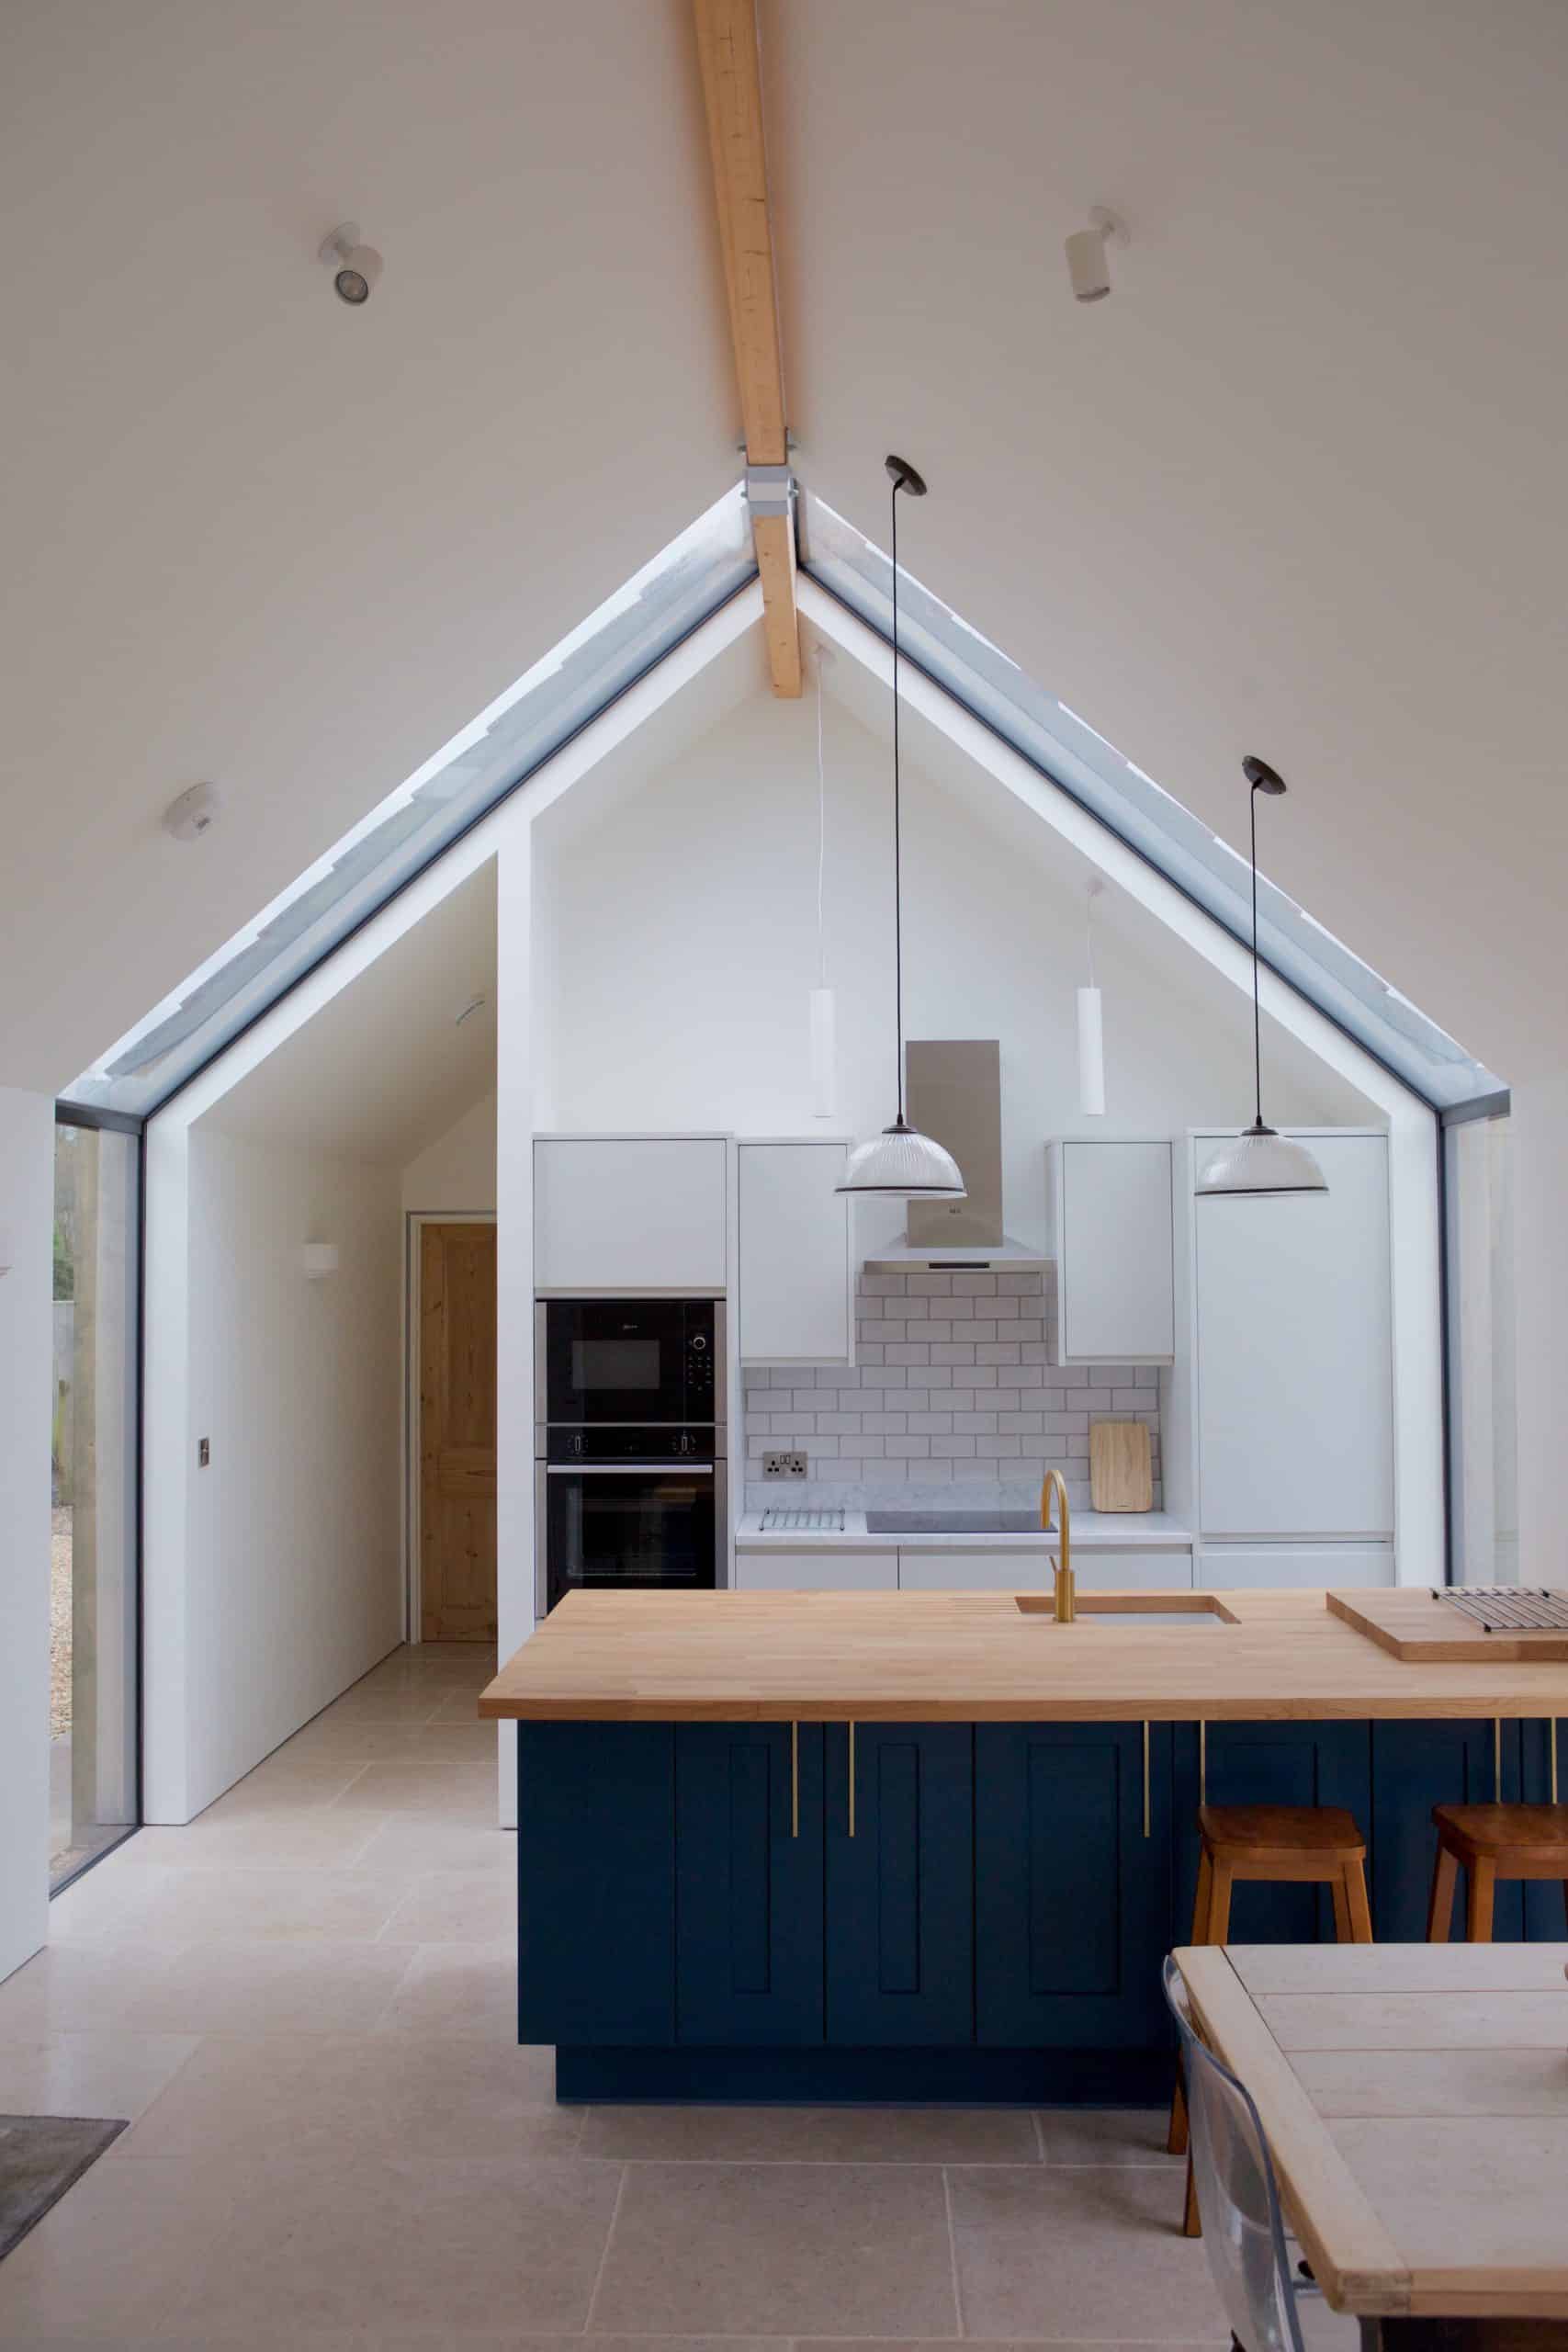 Modern, bright kitchen with apex roof